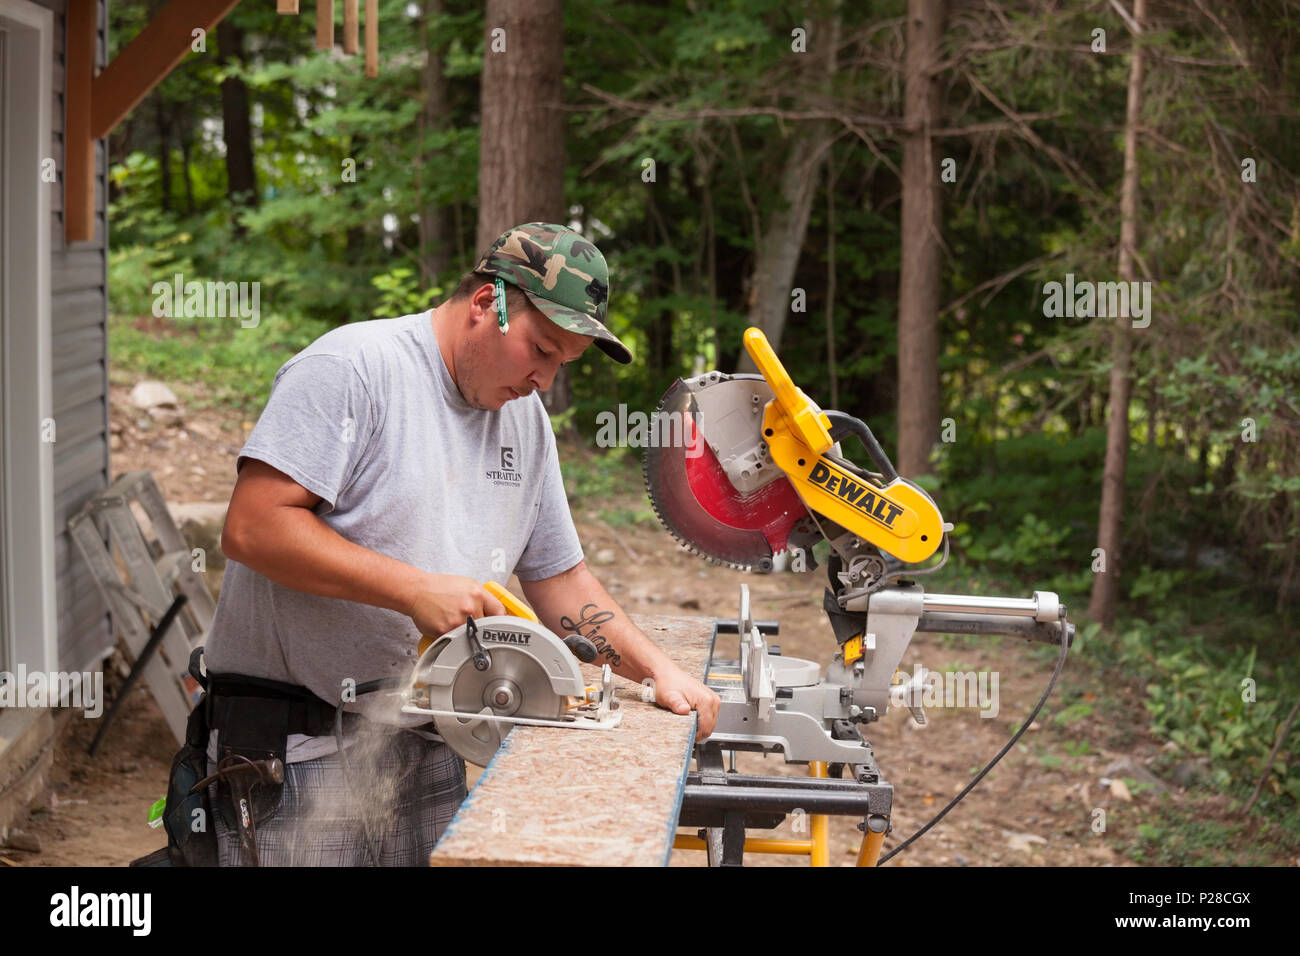 A construction worker using a handheld circular saw to cut a wooden plank. Stock Photo